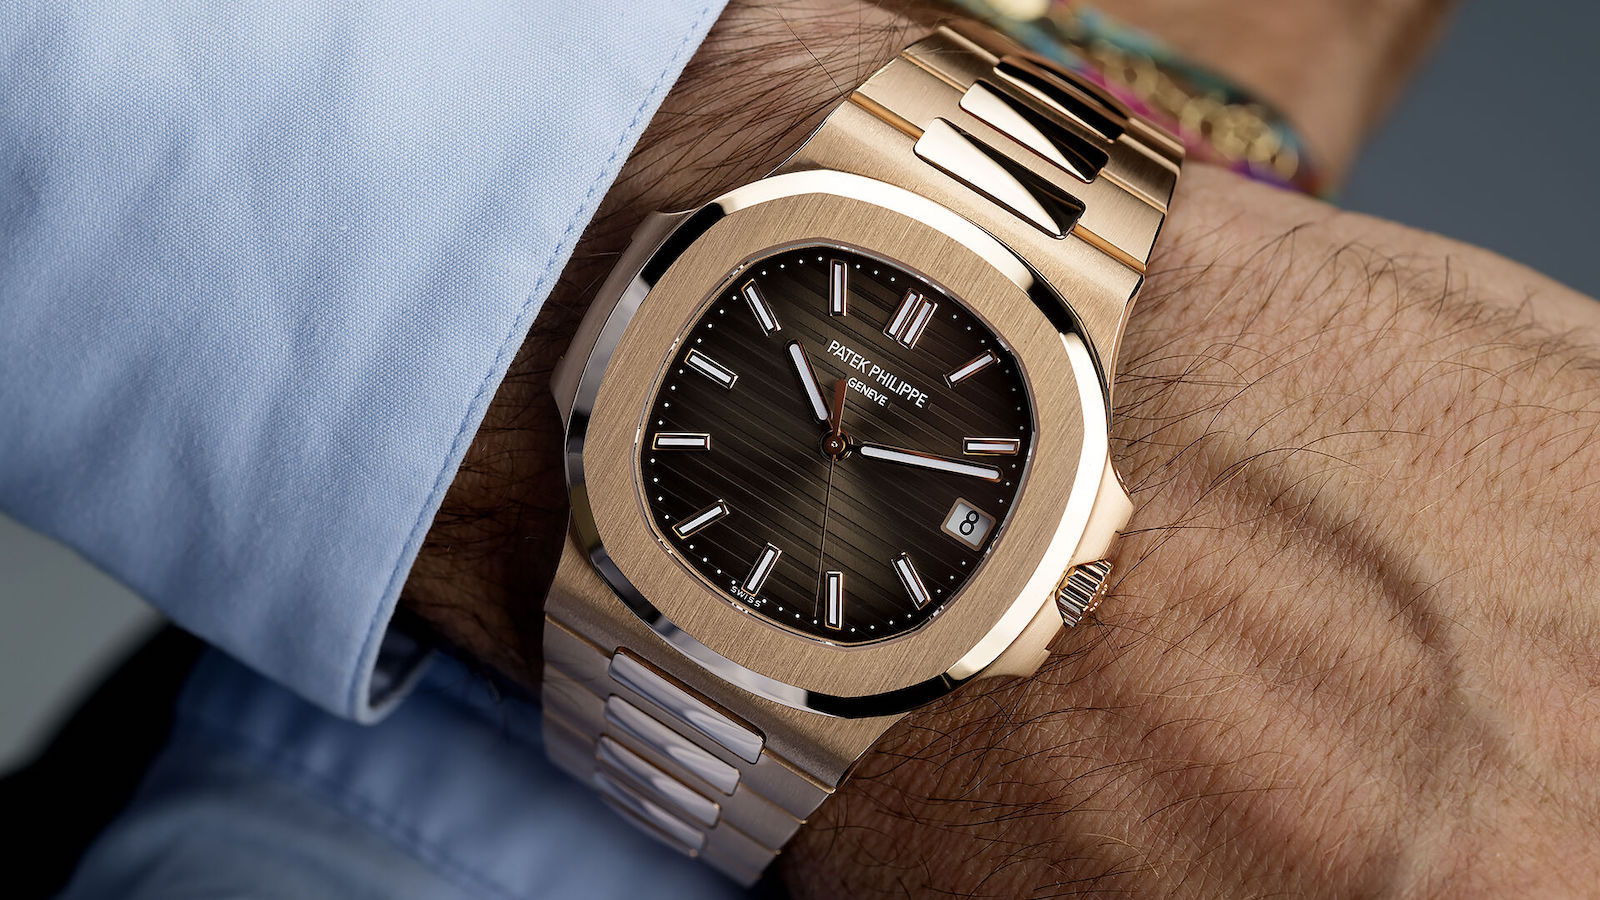 Business Mogul Shares The Real Reason You Should Care About & Wear Luxury Watches